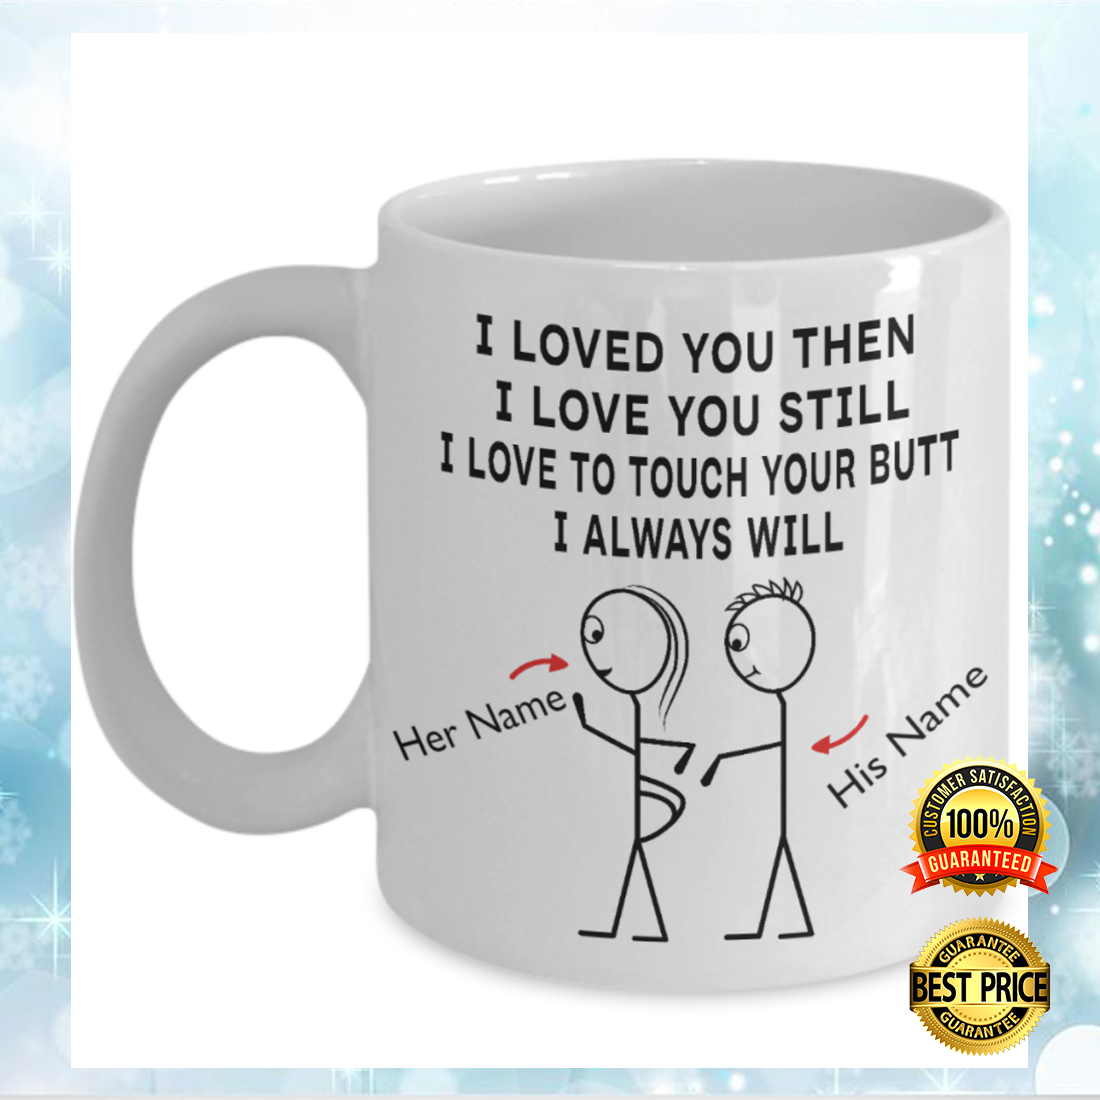 Personalized i loved you then i love you still i love to touch your butt i always will mug 4